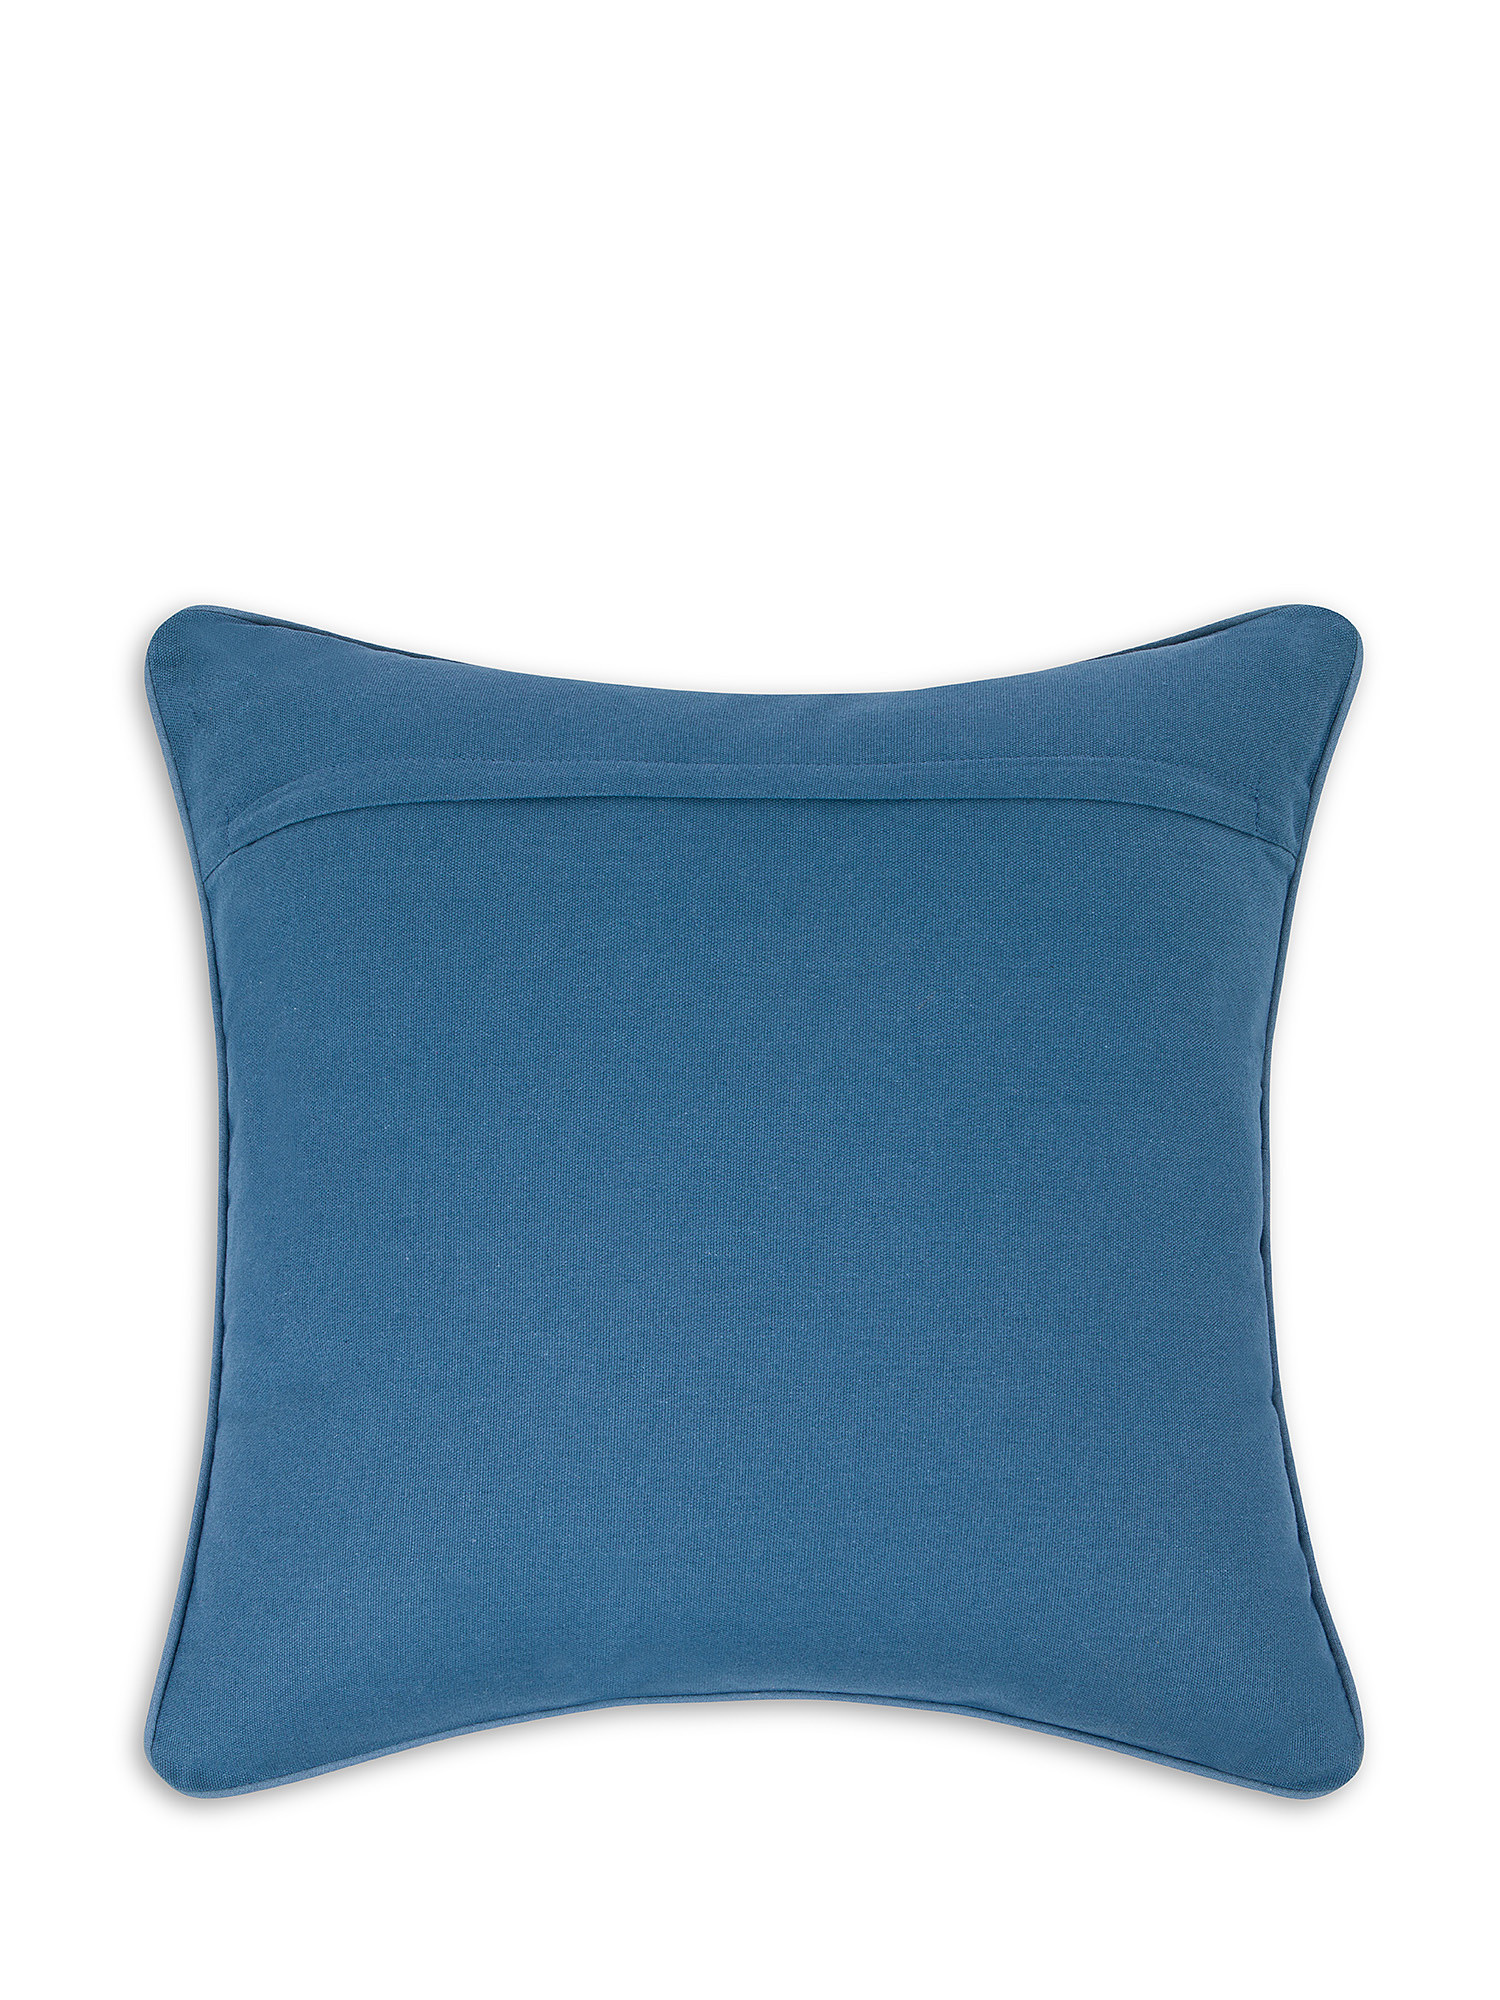 45x45 cm cushion with applications and embroidery, Light Blue, large image number 1